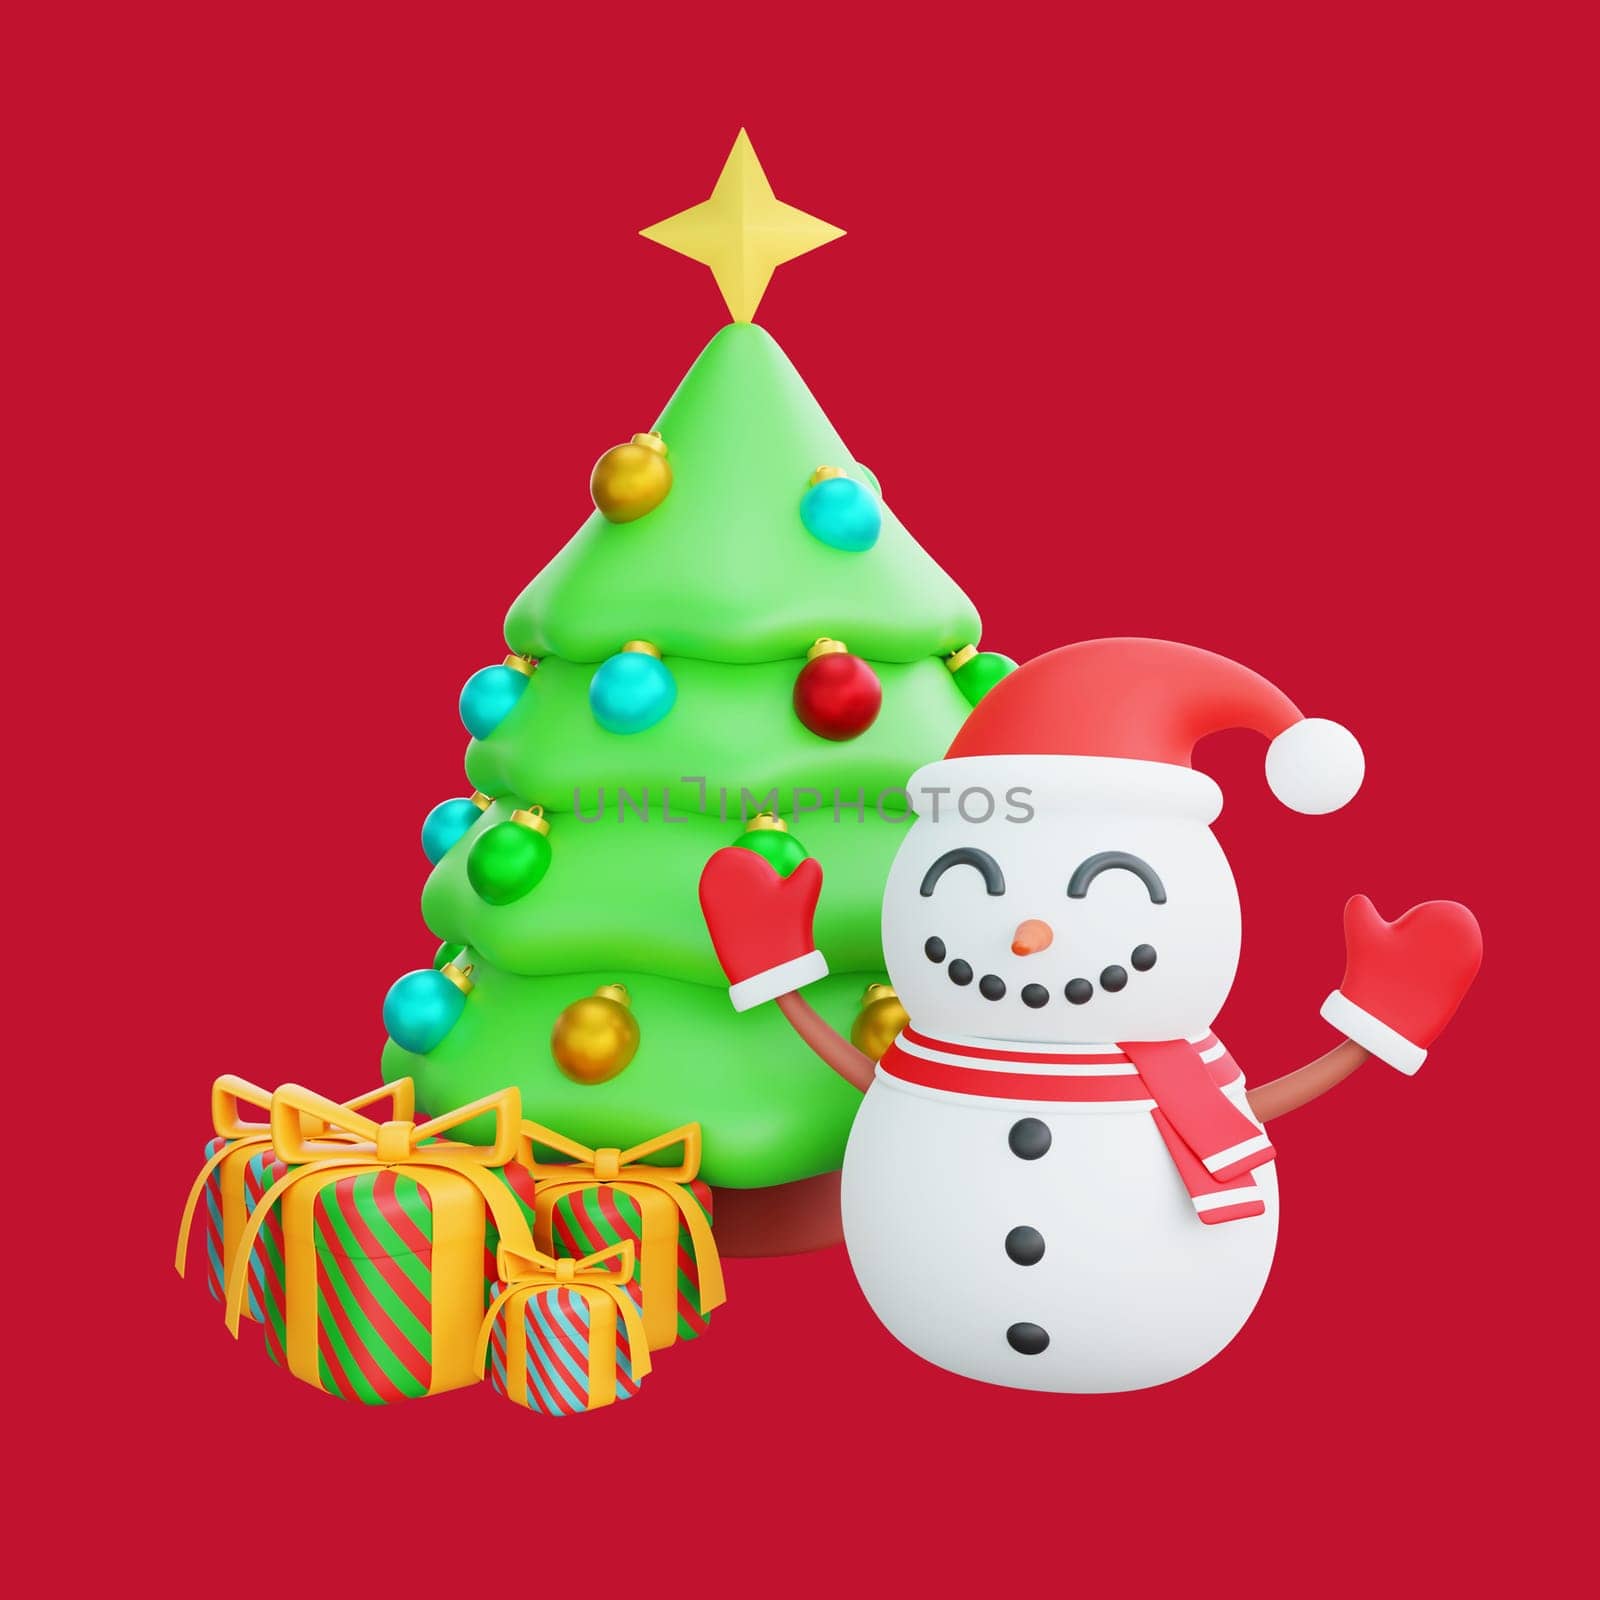 3D illustration of Christmas tree and a cheerful snowman surrounded by colorful gifts. Perfect for Christmas and Happy New Year celebrations